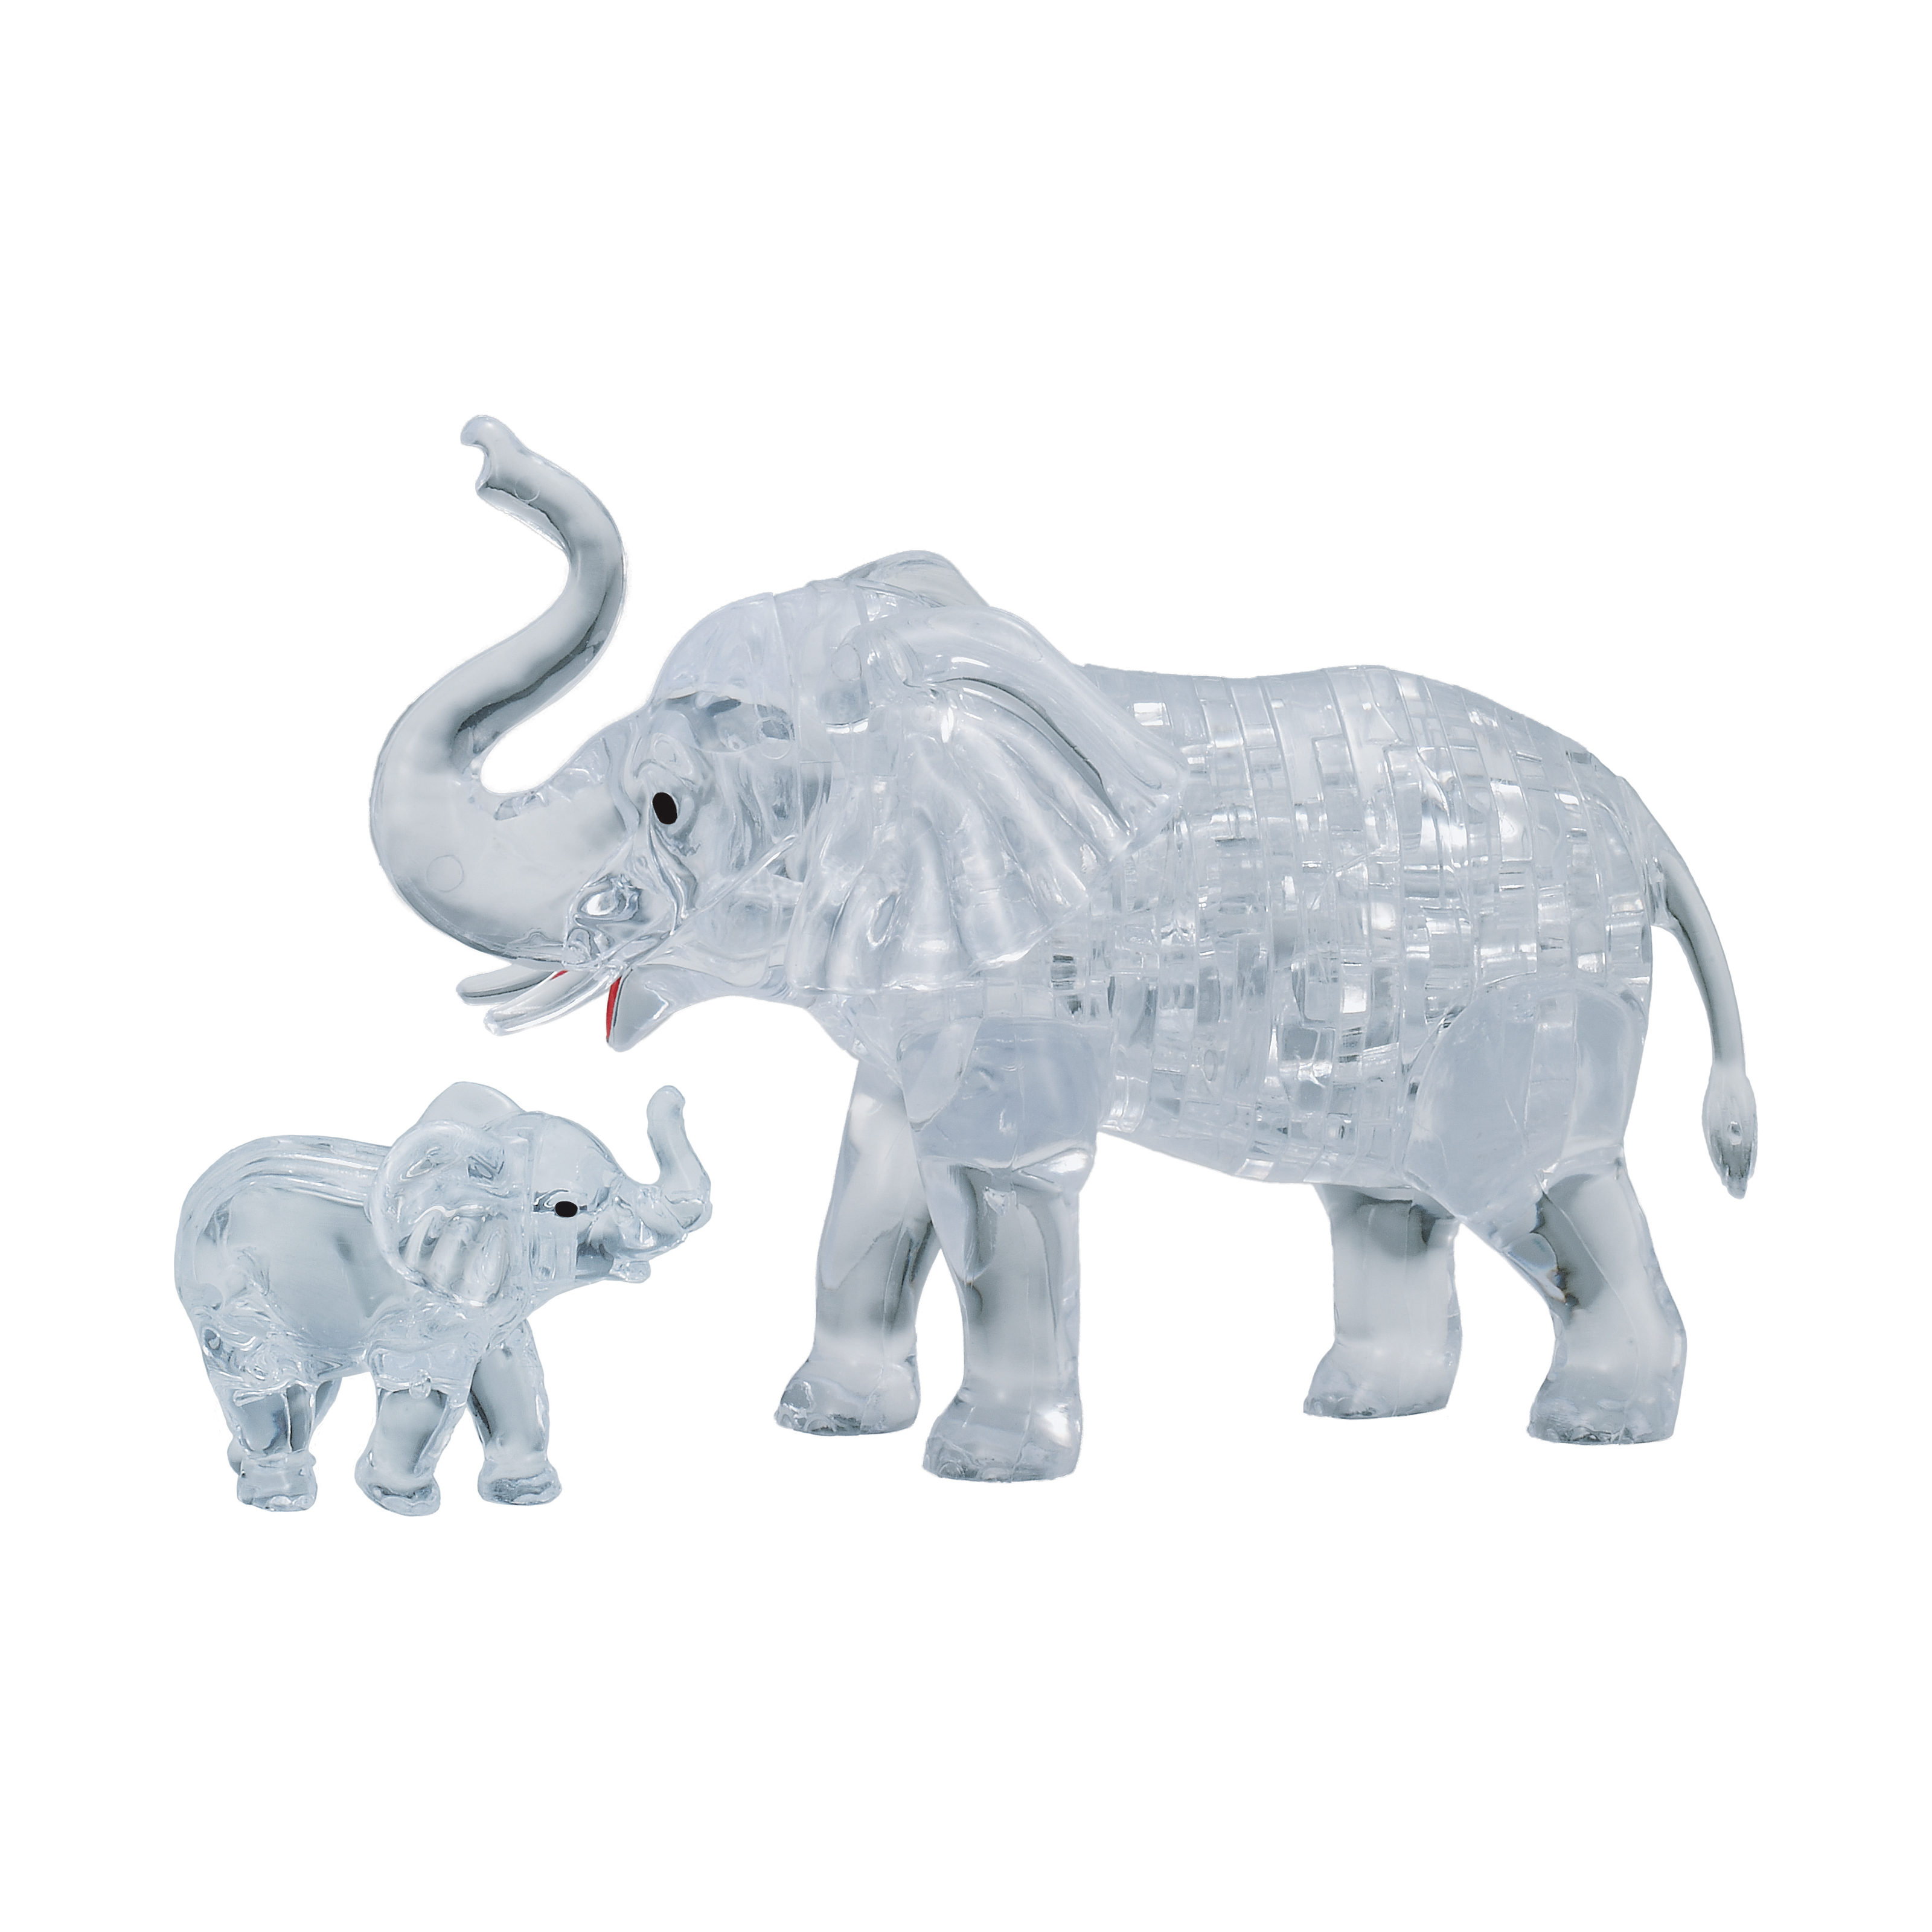 Bepuzzled 3D Crystal Puzzle - Elephant and Baby: 46 Pcs